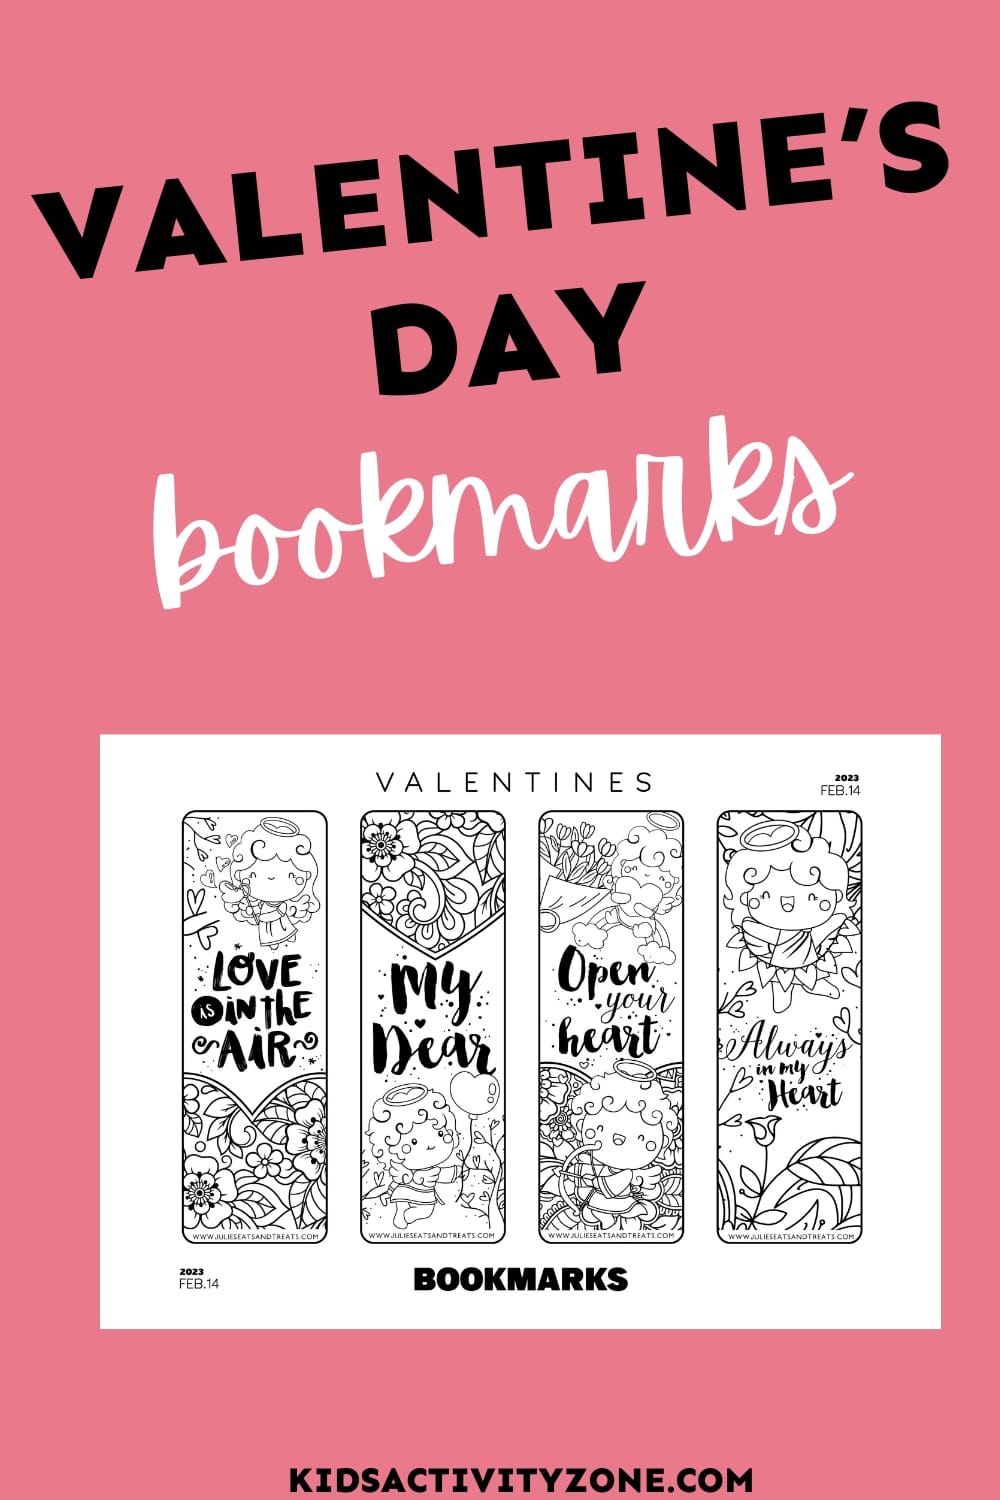 Valentine's Day Bookmarks - Featured Image